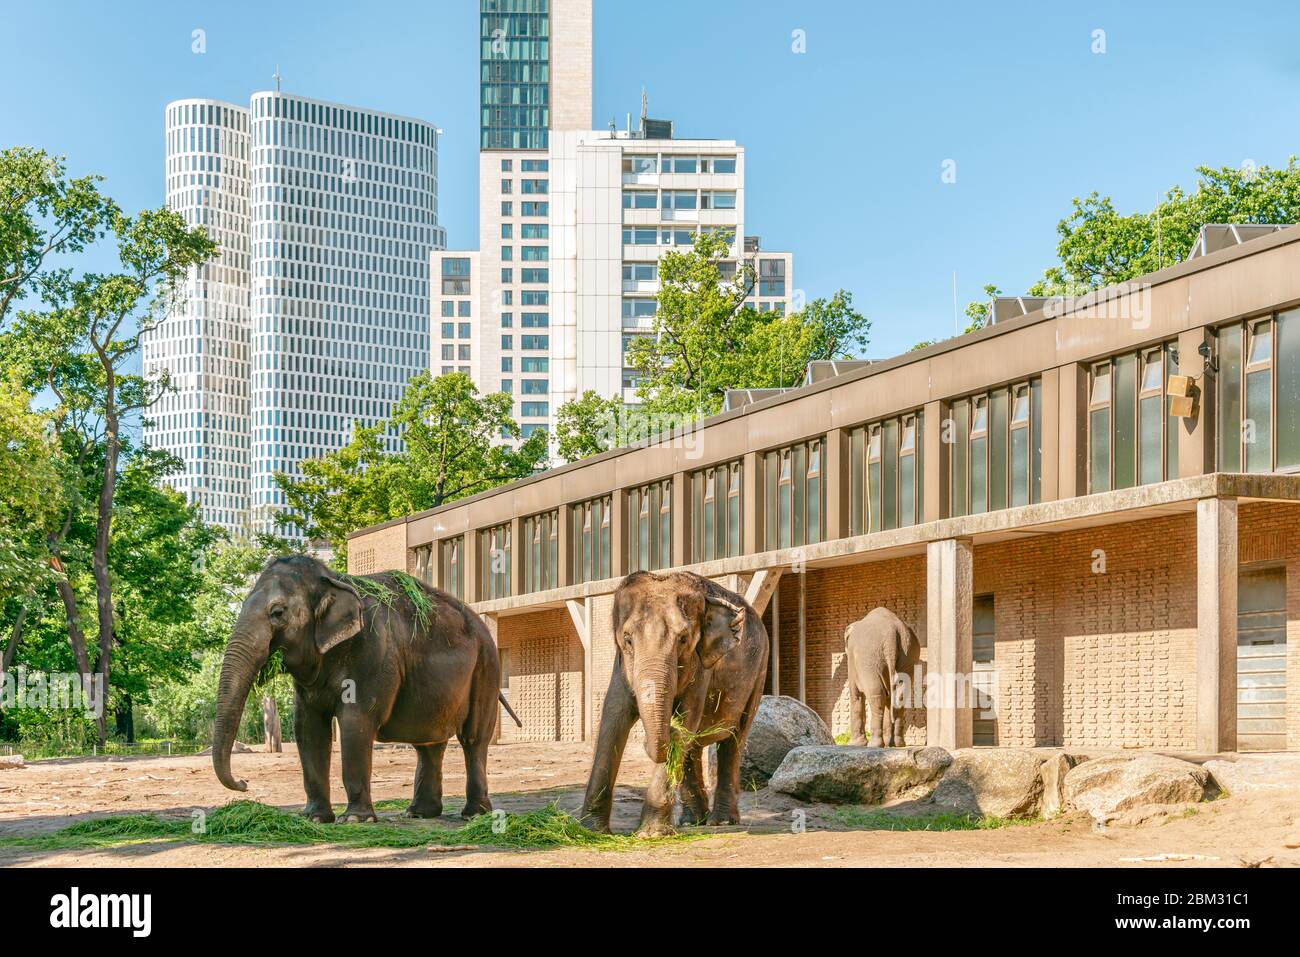 Elephants in front of the Elephant House at Berlin Zoo with highrise buildings in the background, Germany Stock Photo